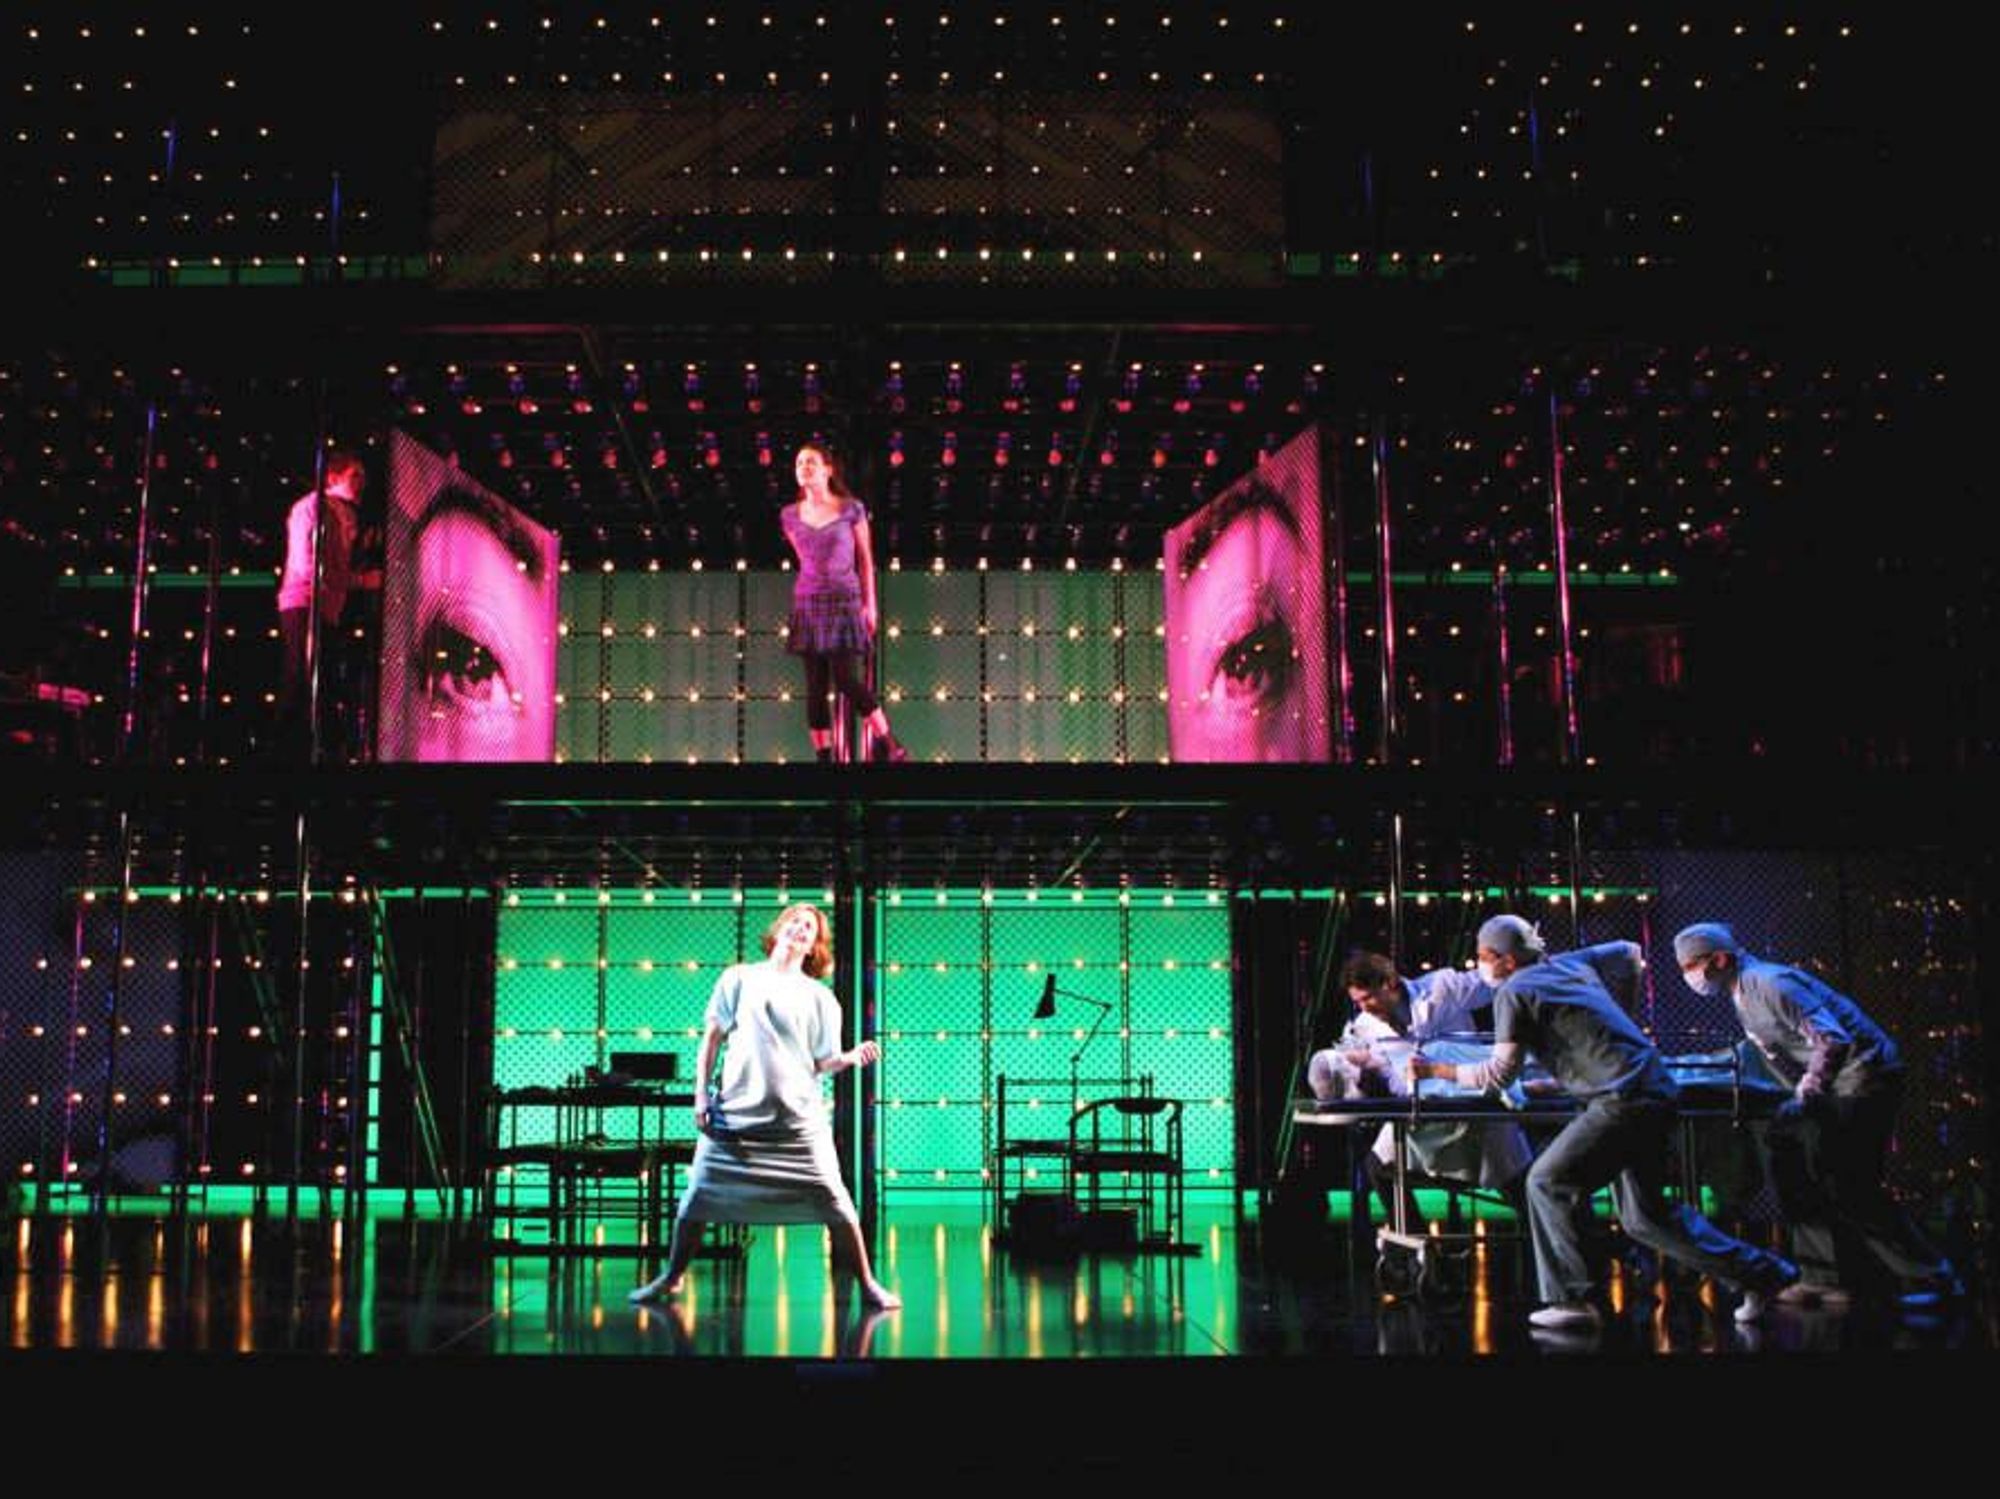 Next to Normal on Broadway